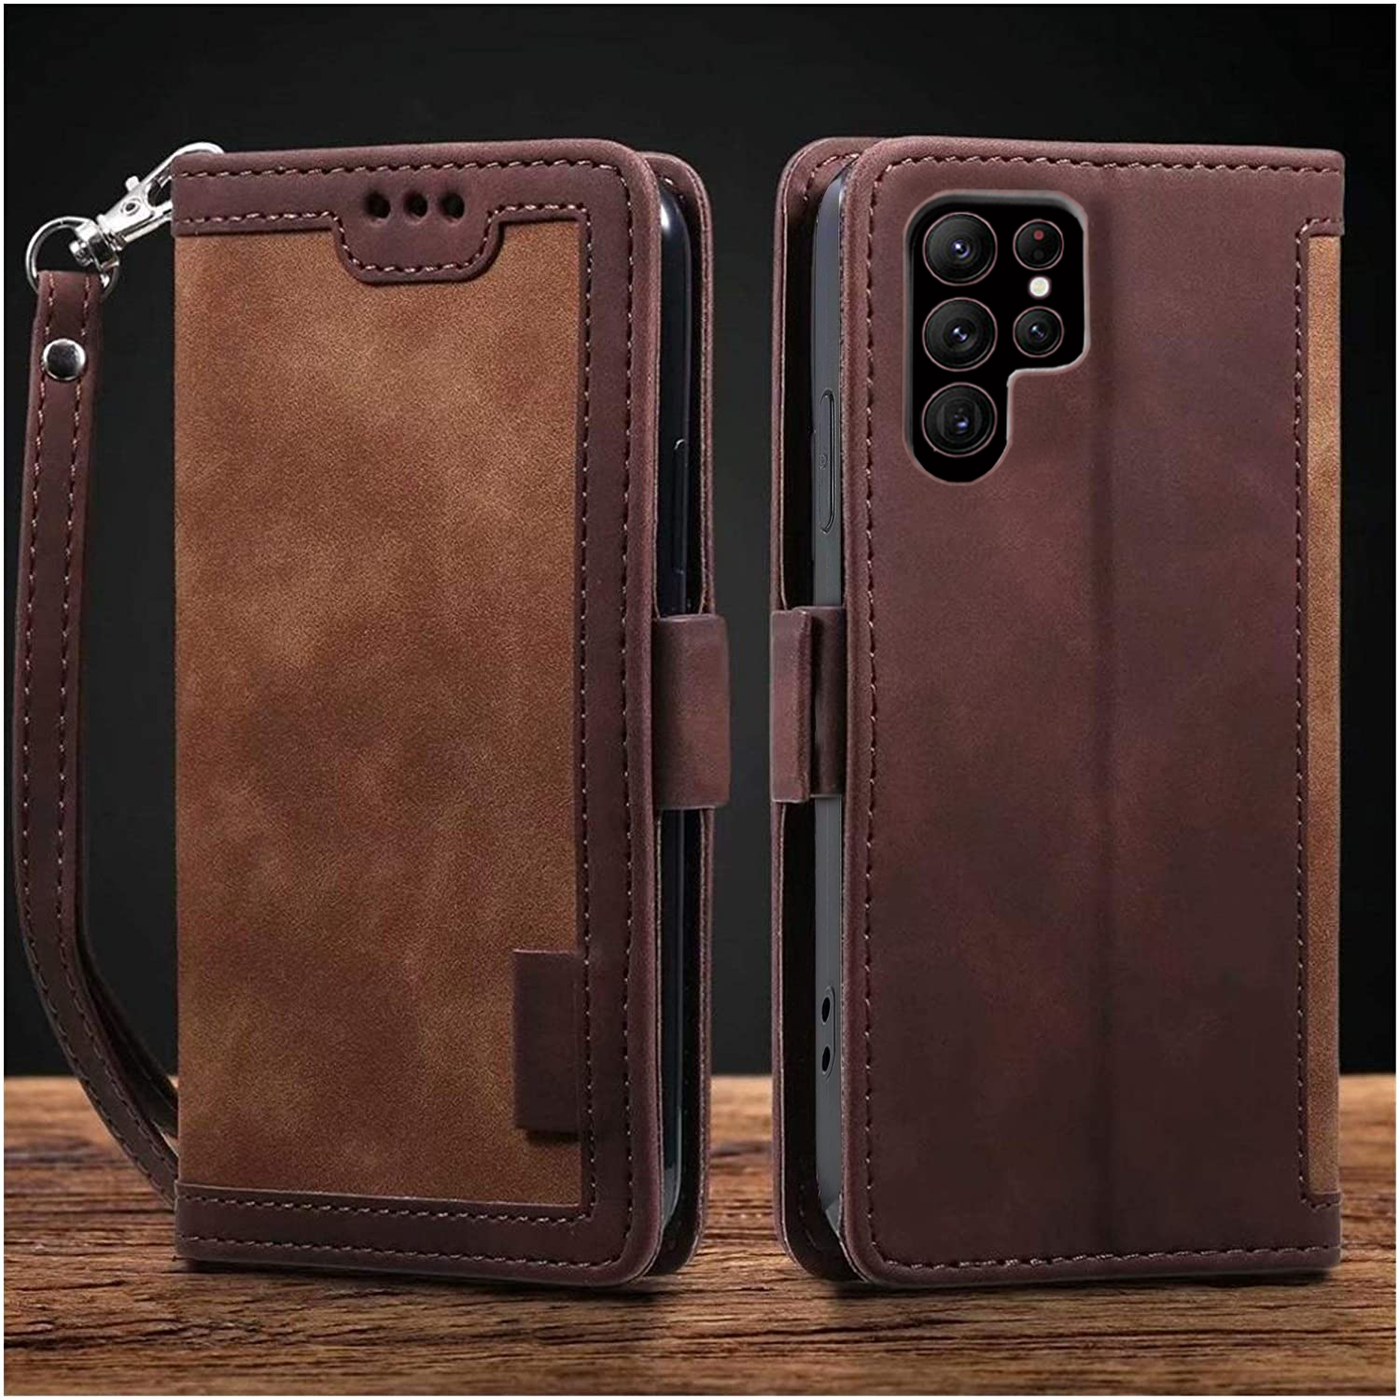 Samsung Galaxy S22 Ultra Coffee color leather wallet flip cover case By excelsior